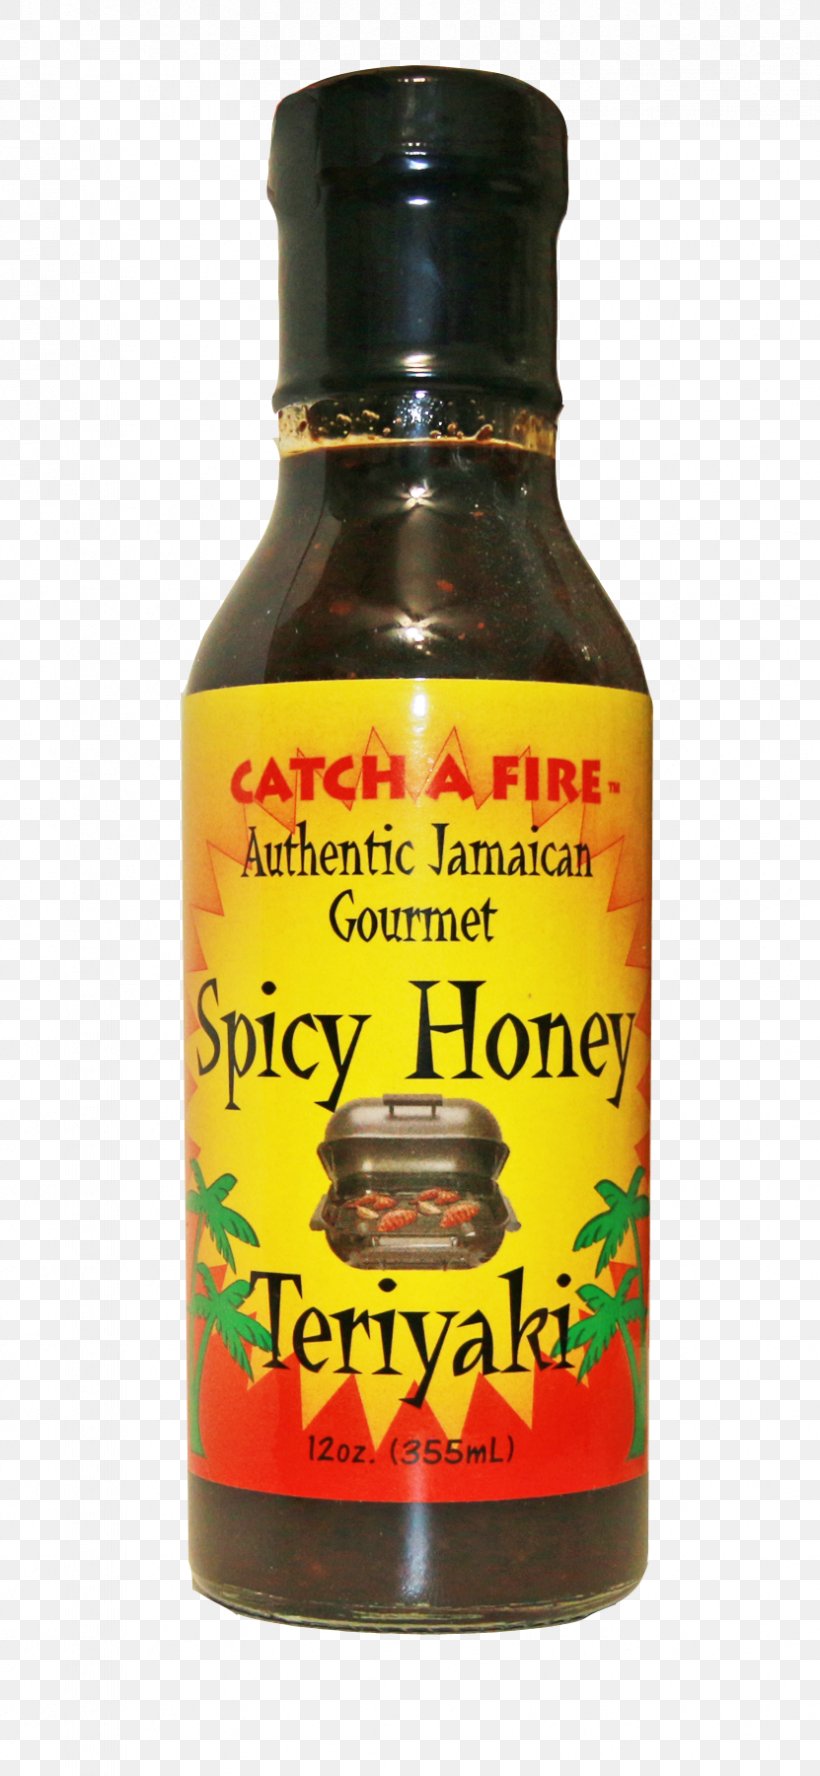 Barbecue Sauce Condiment Jamaican Cuisine Hot Sauce Cajun Cuisine, PNG, 831x1800px, Barbecue Sauce, Cajun Cuisine, Chili Pepper, Cholula Hot Sauce, Condiment Download Free